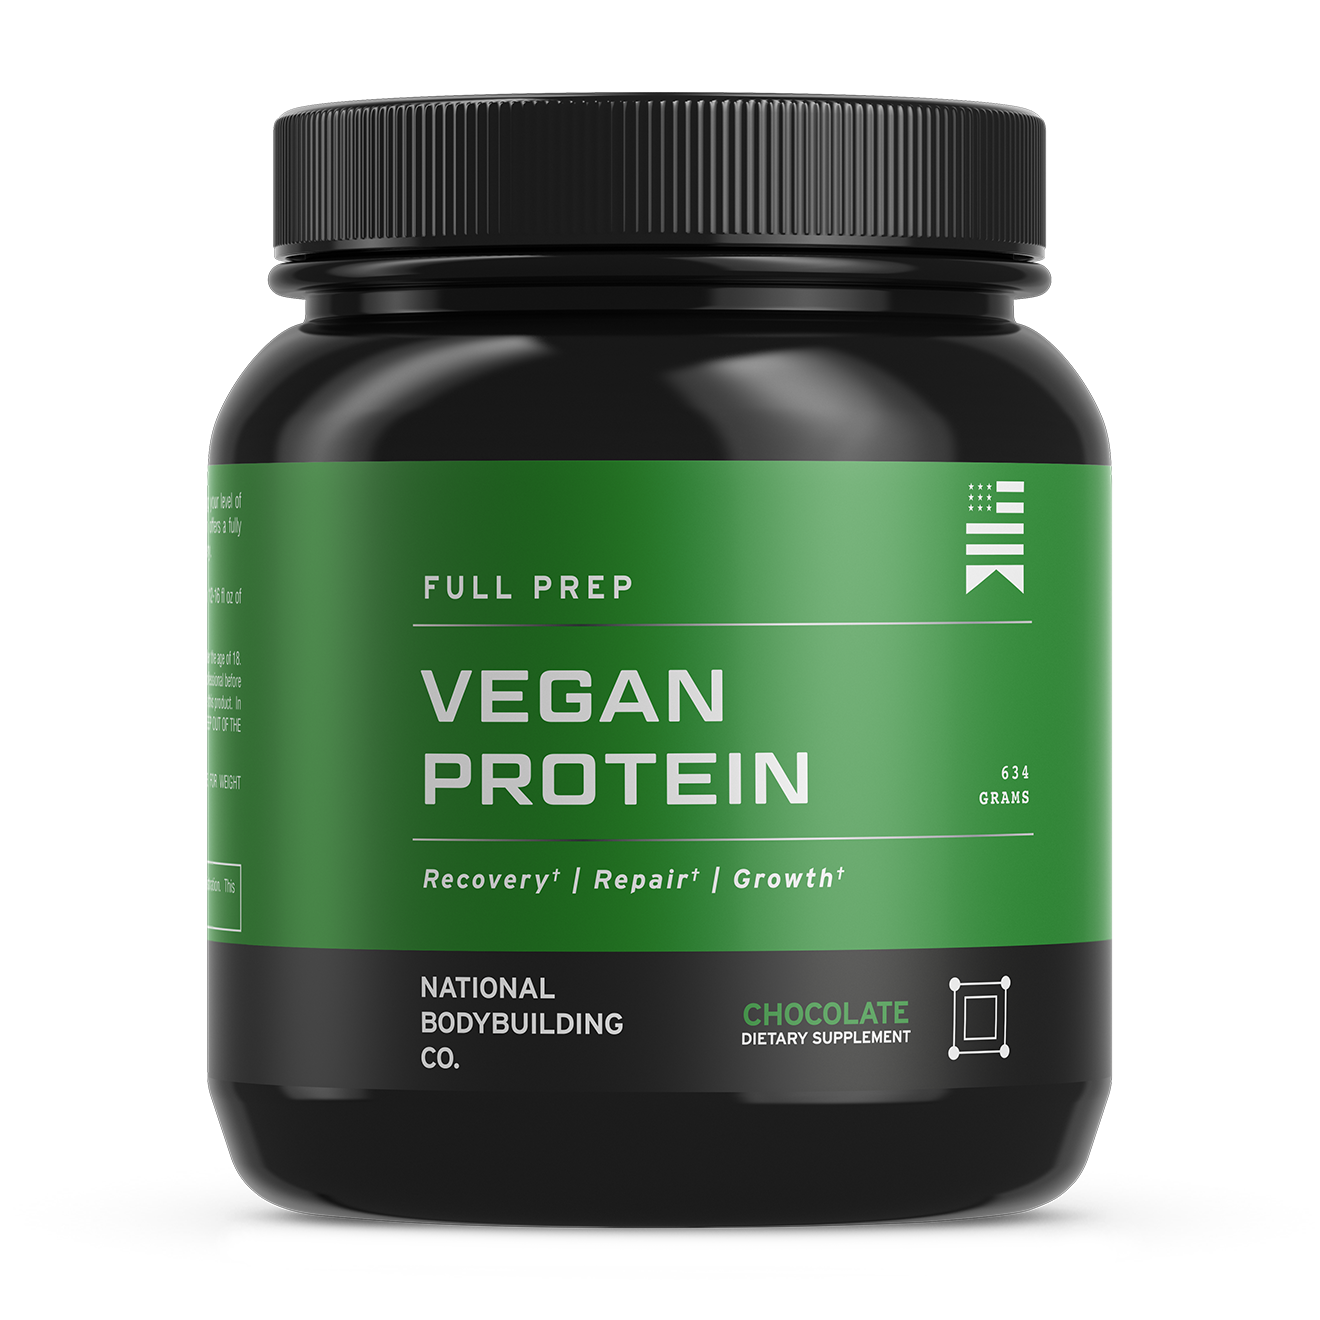 National Bodybuilding Company Vegan Protein Review